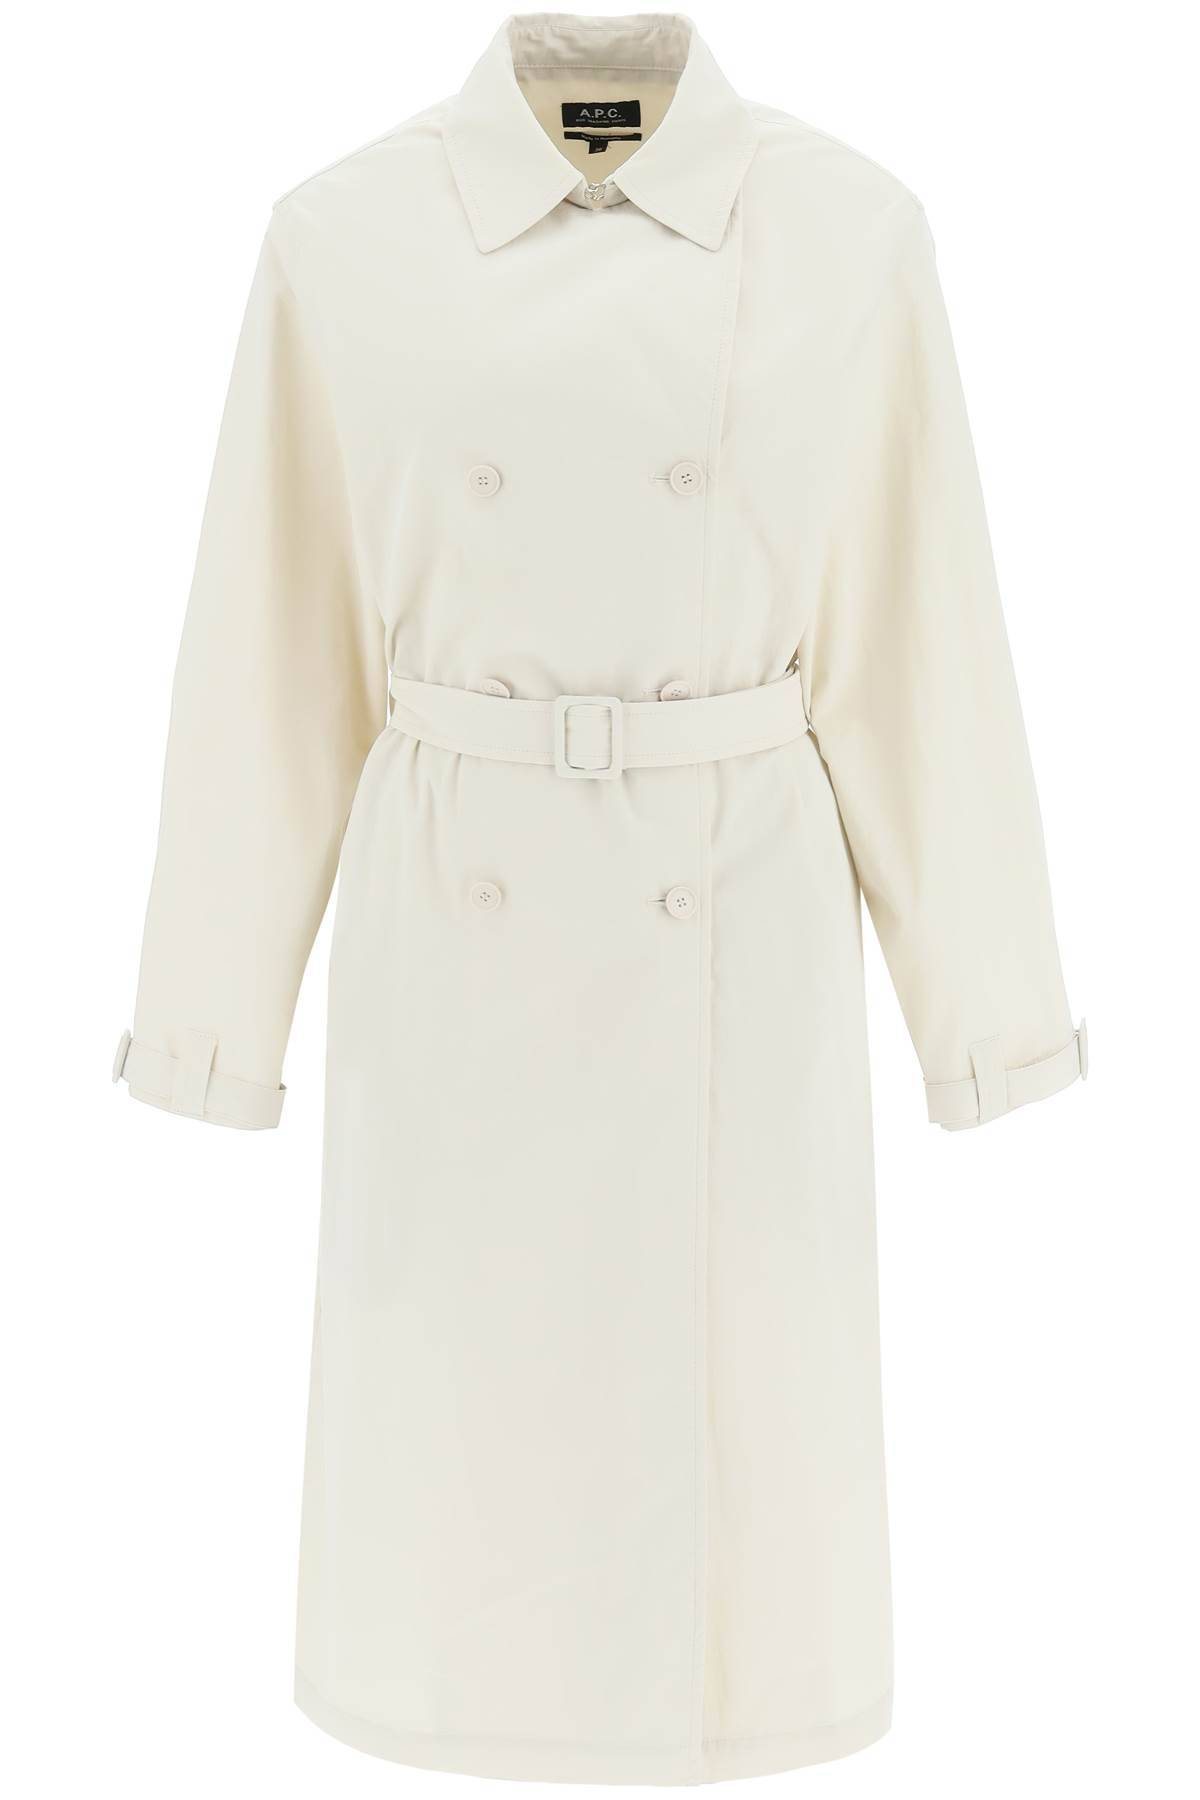 A.P.C. A. P.C. 'irene' double-breasted trench coat